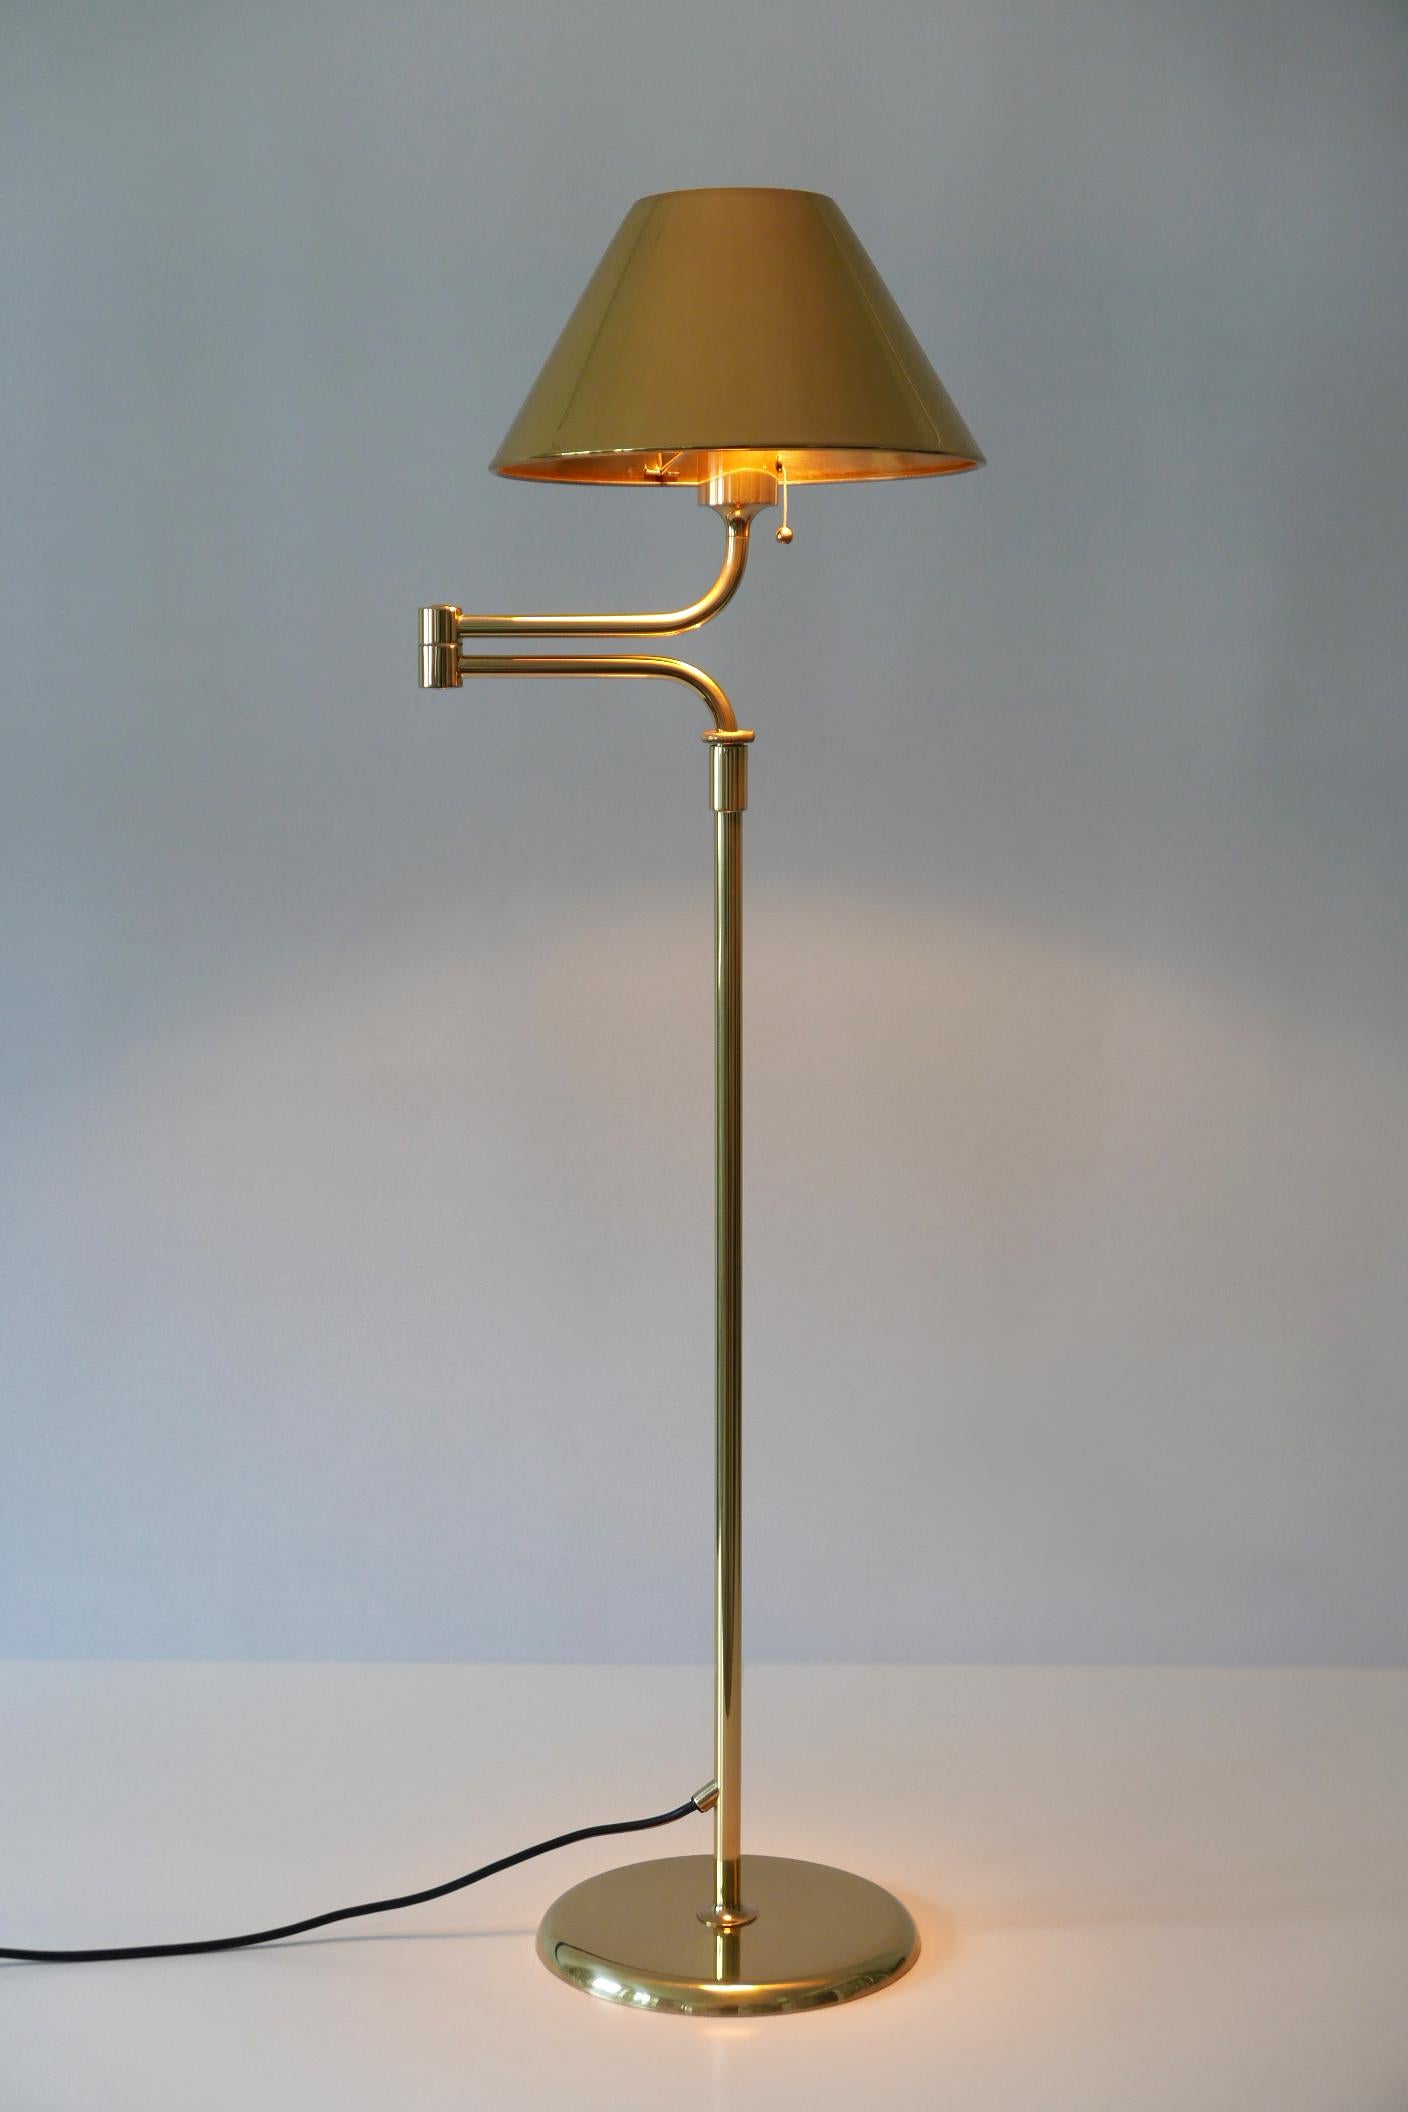 Late 20th Century Articulated Brass Floor Lamp or Reading Light by Florian Schulz 1980s Germany